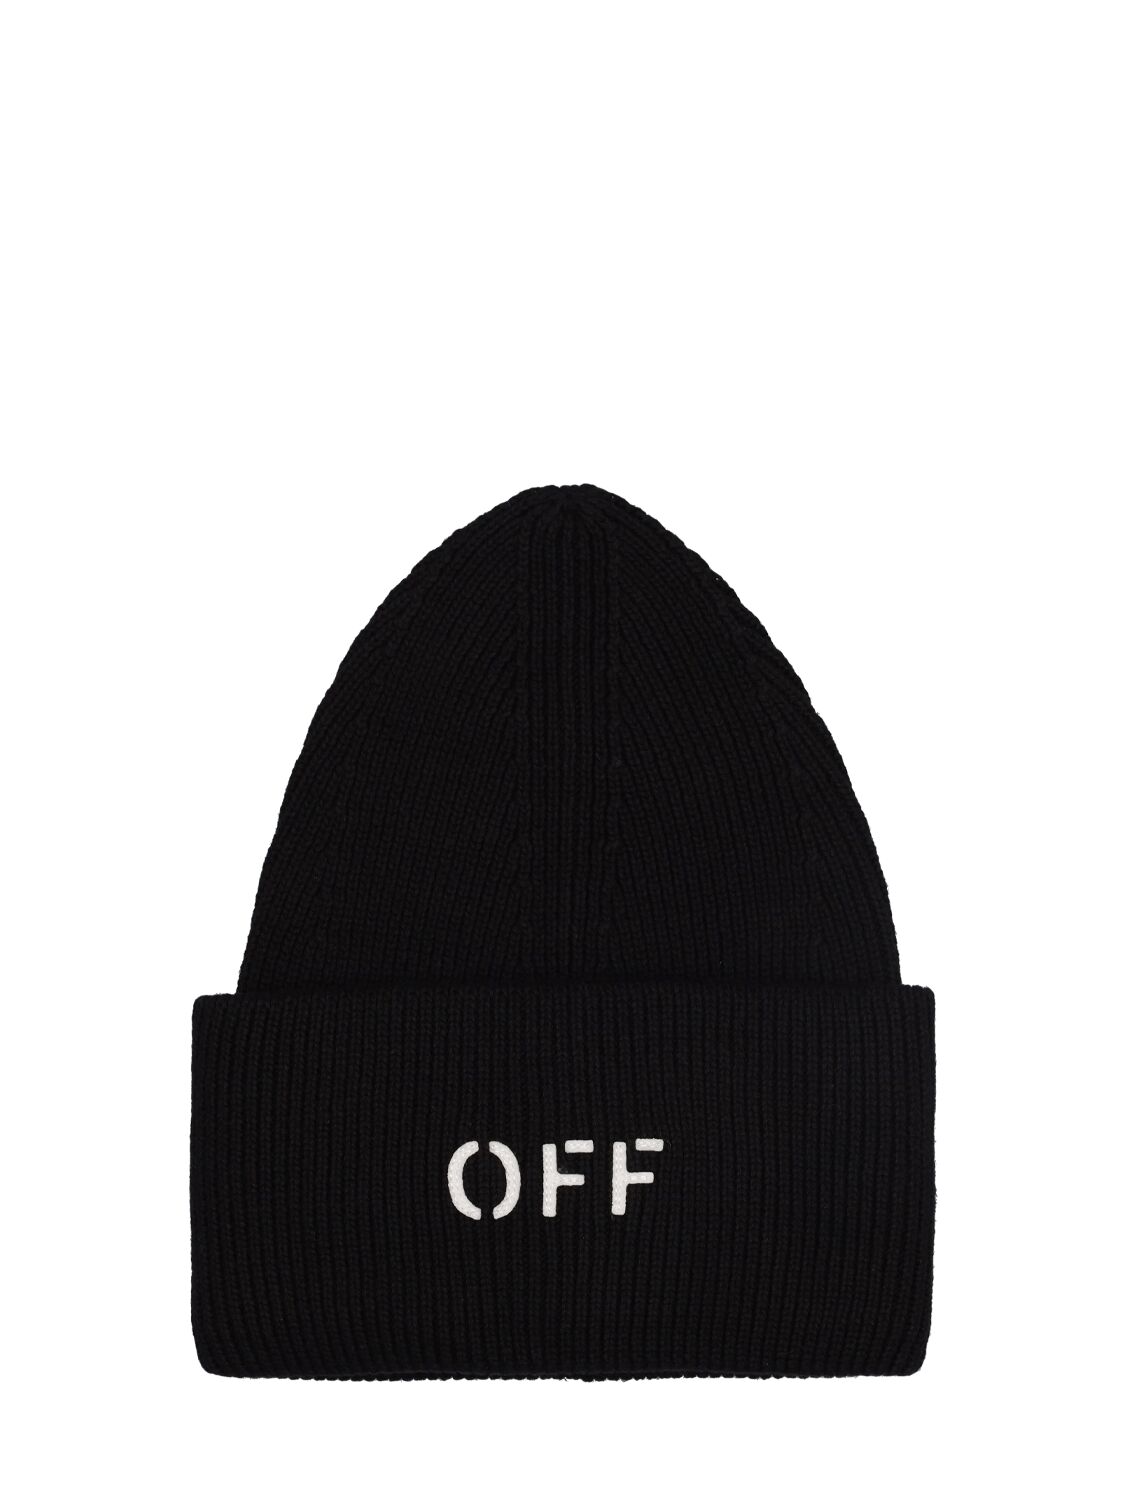 Image of Off Stamp Loose Knit Cotton Blend Beanie